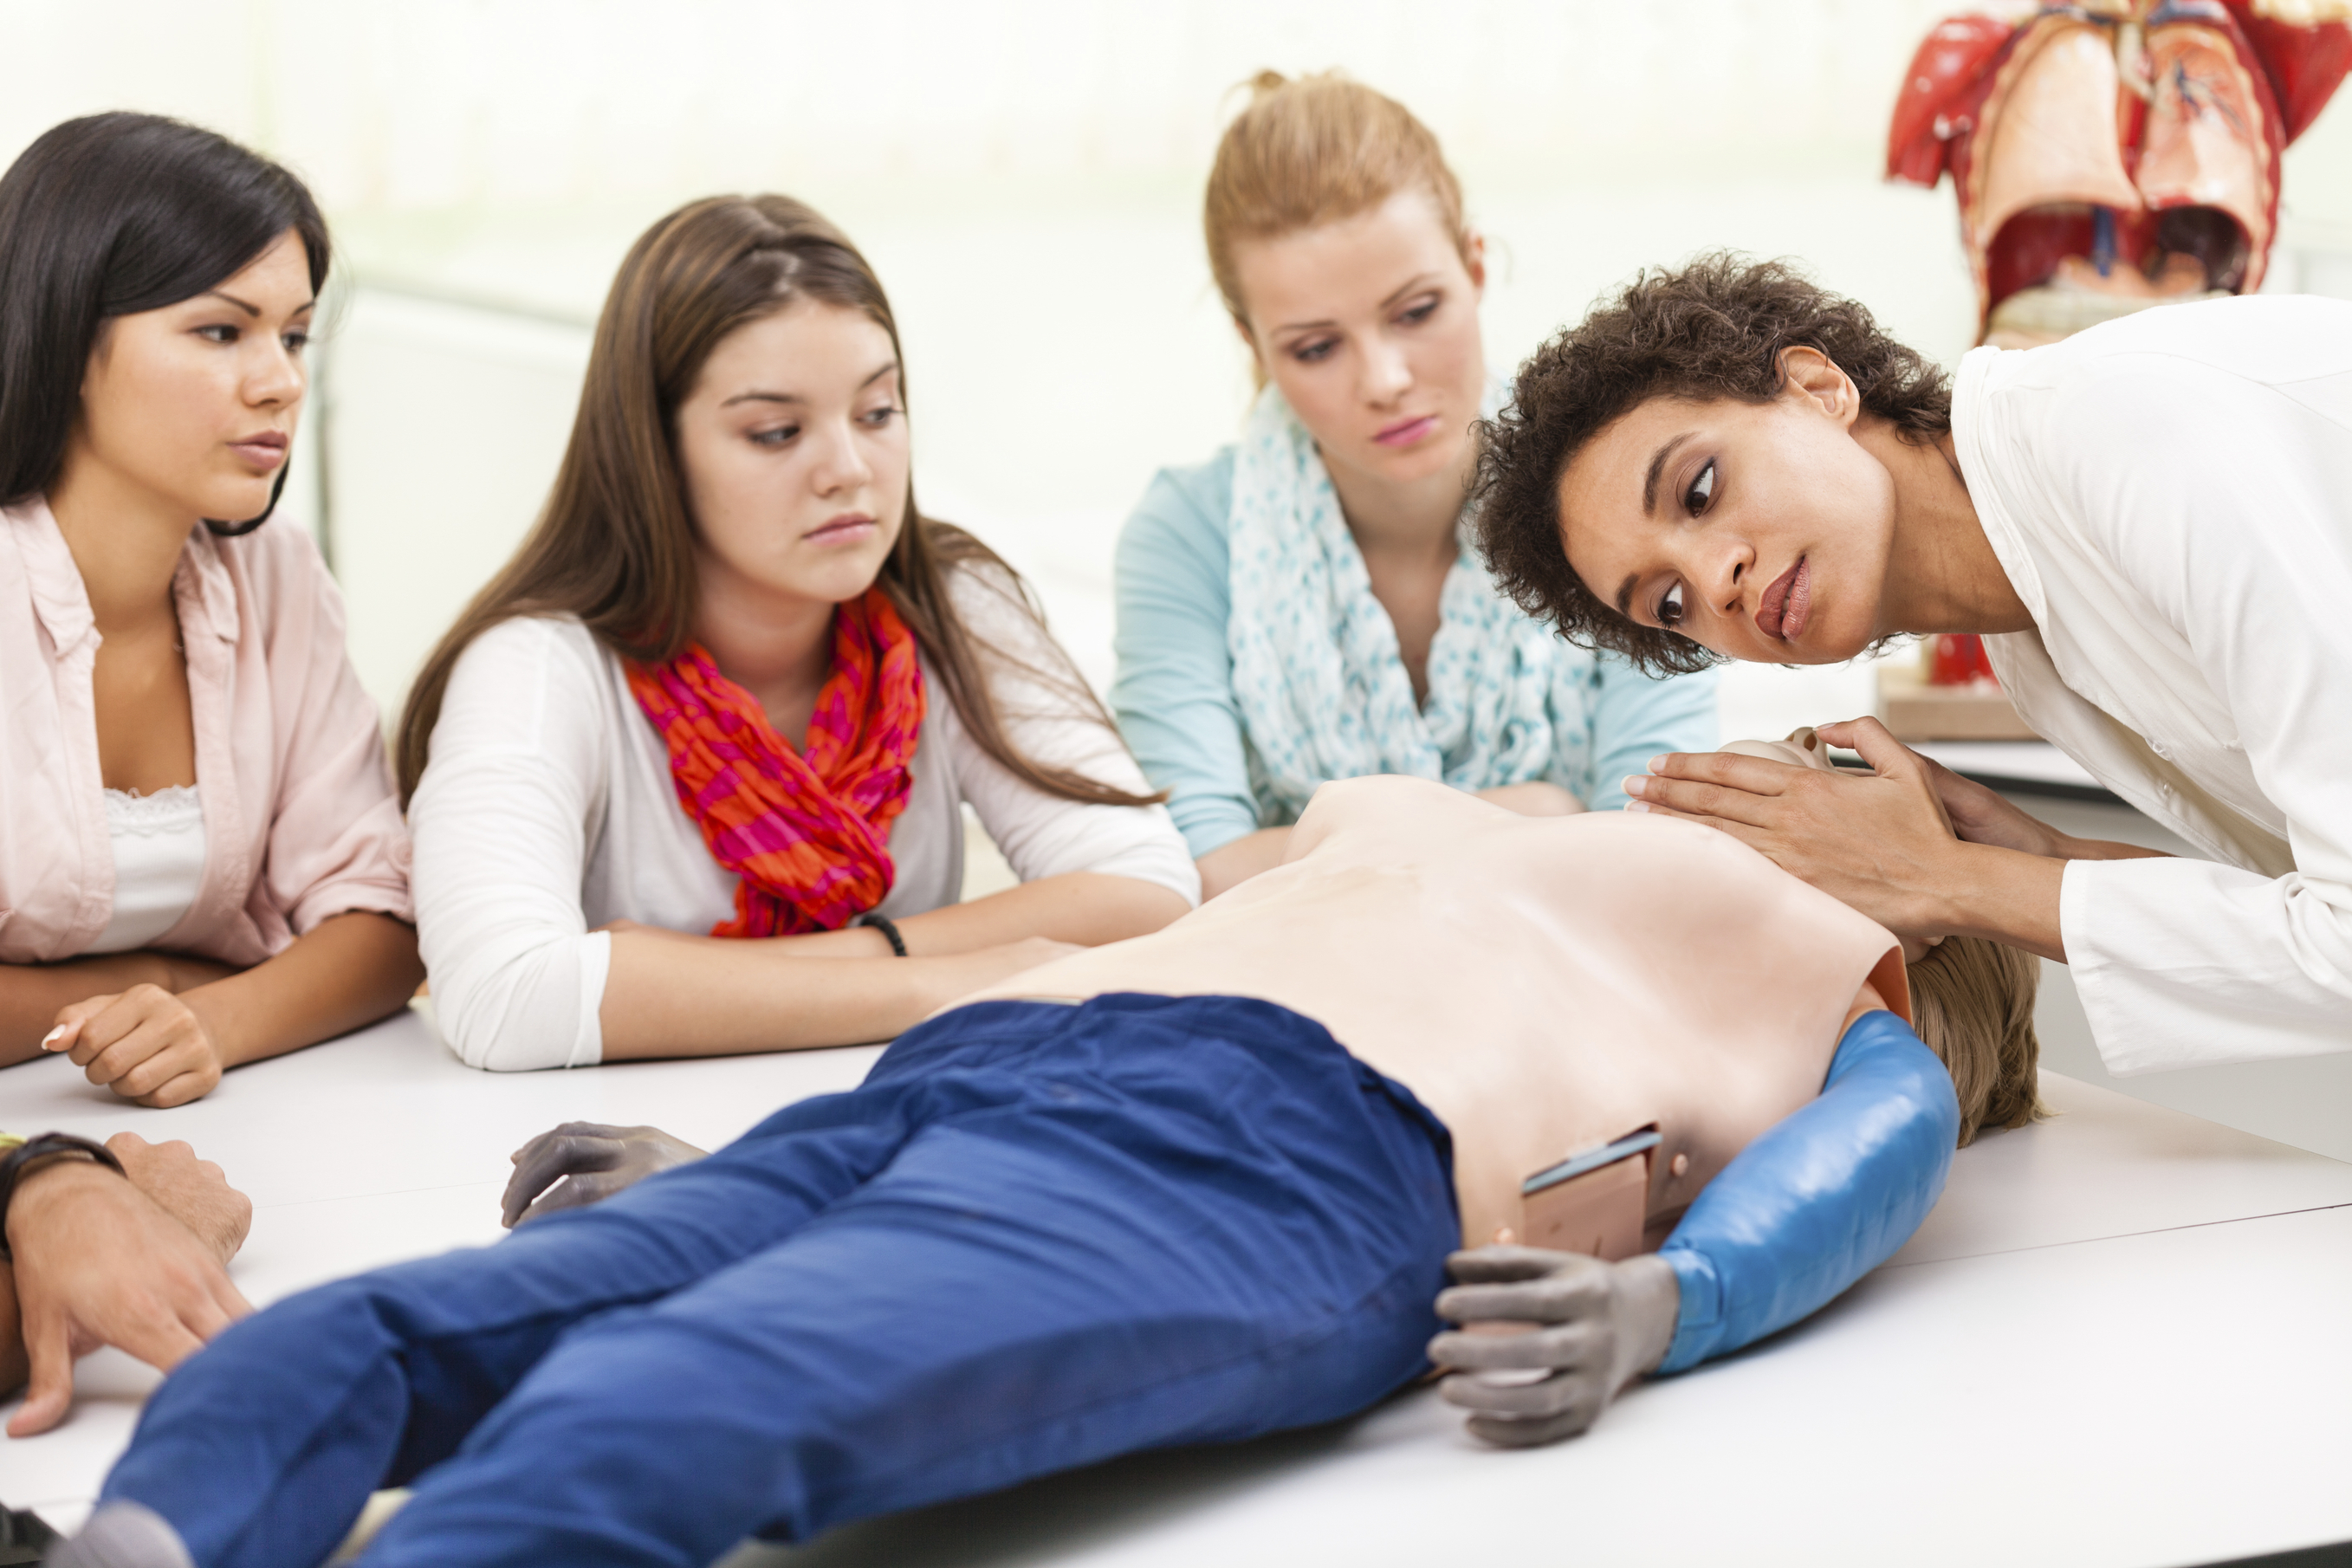 Female instructor demonstrating chest compressions on a CPR dummy.